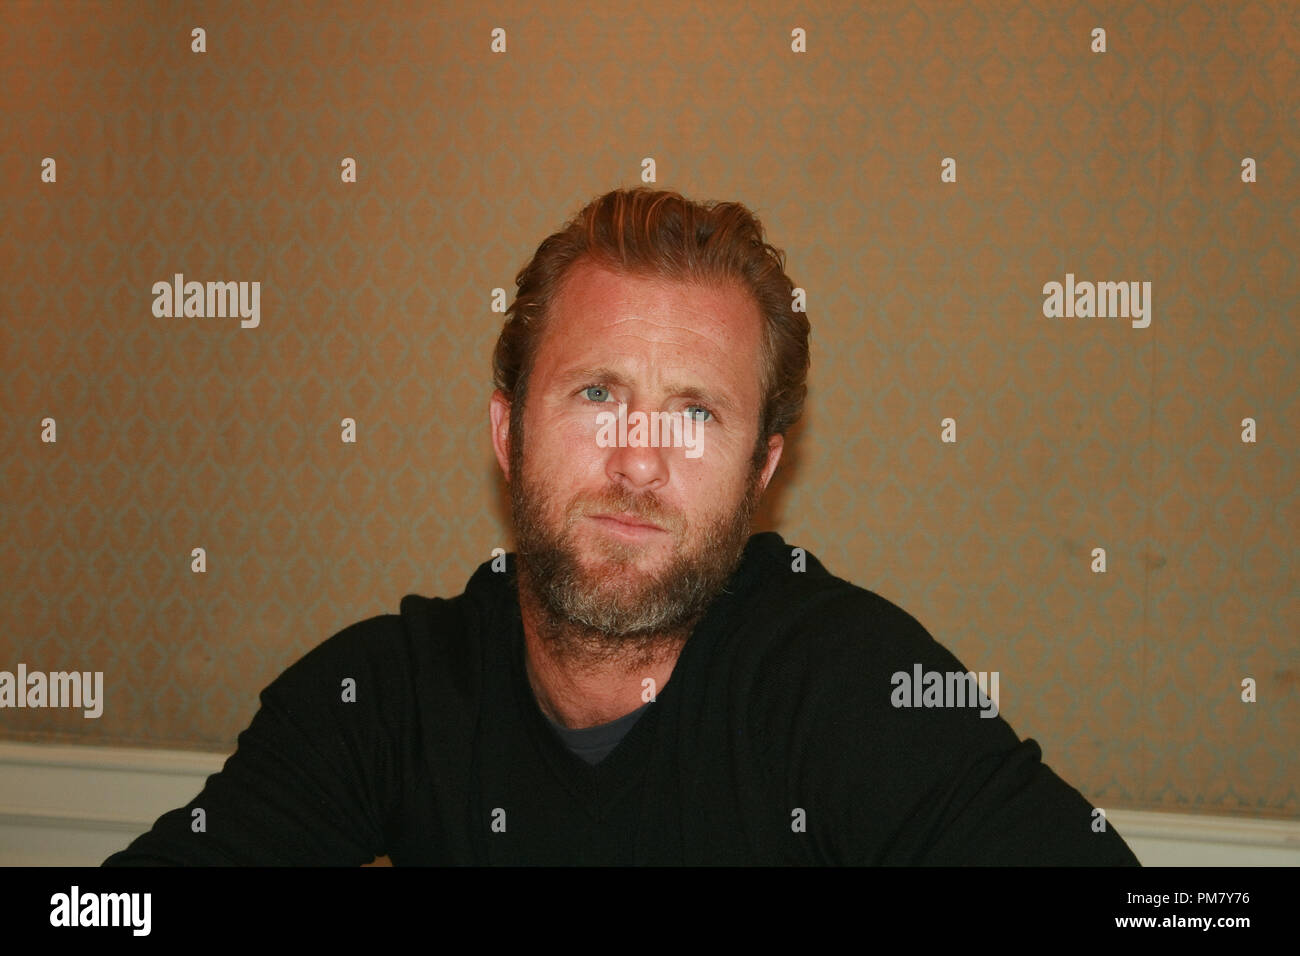 Scott Caan 'Hawaii Five-0' Portrait Session, June 6, 2012.  Reproduction by American tabloids is absolutely forbidden. File Reference # 31547 025JRC  For Editorial Use Only -  All Rights Reserved Stock Photo